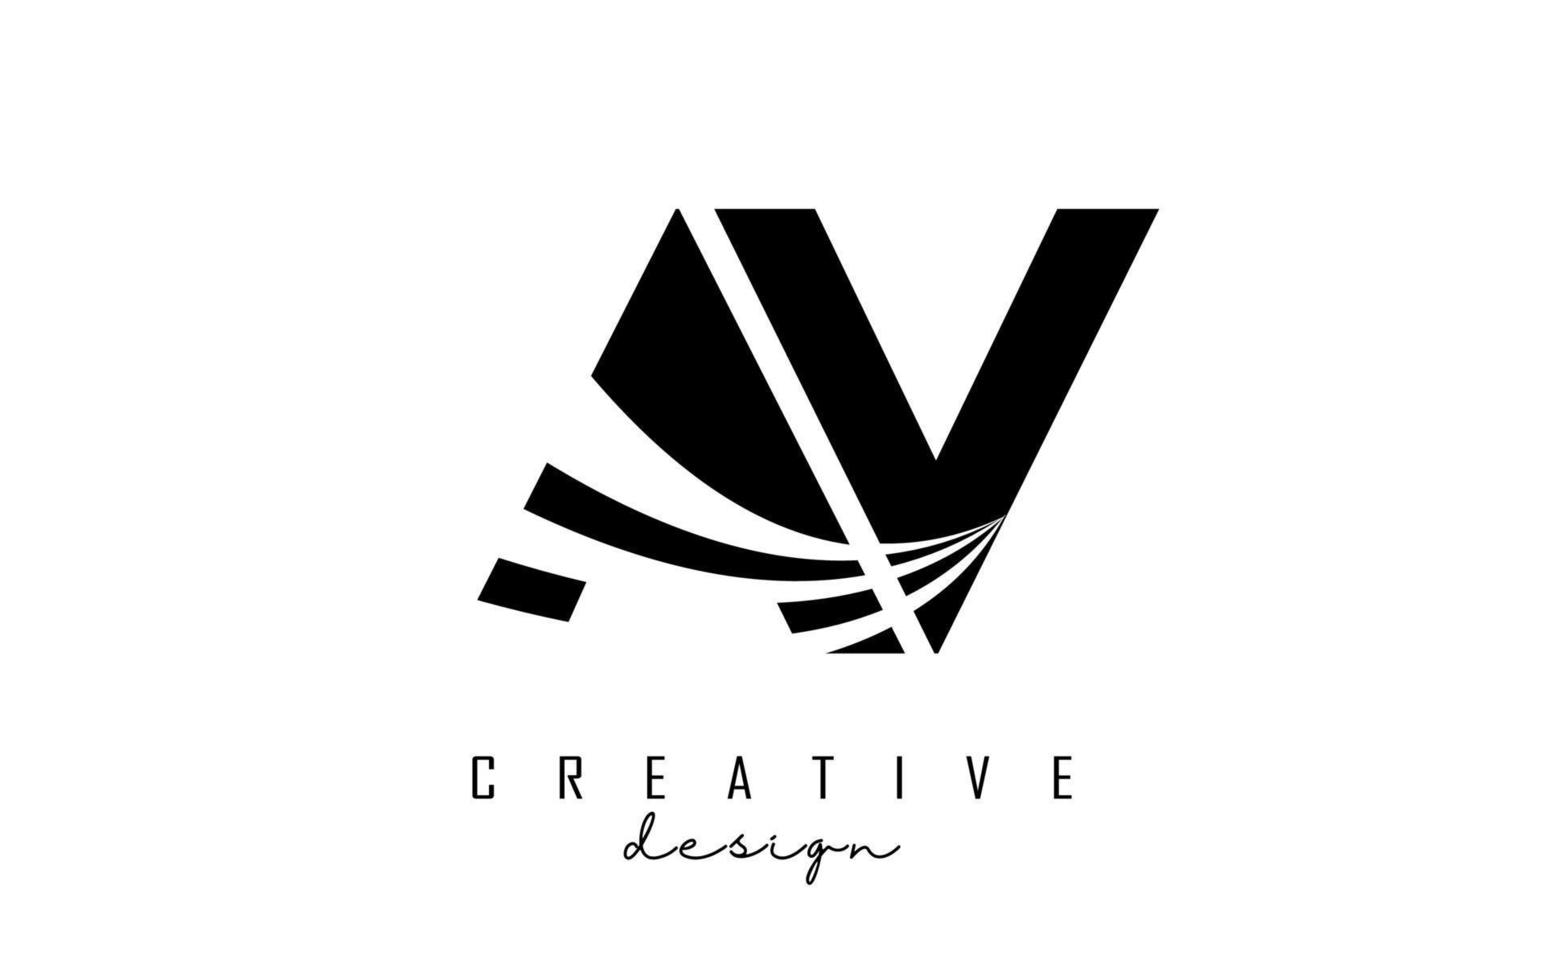 Creative black letters AV A V logo with leading lines and road concept design. Letters with geometric design. vector